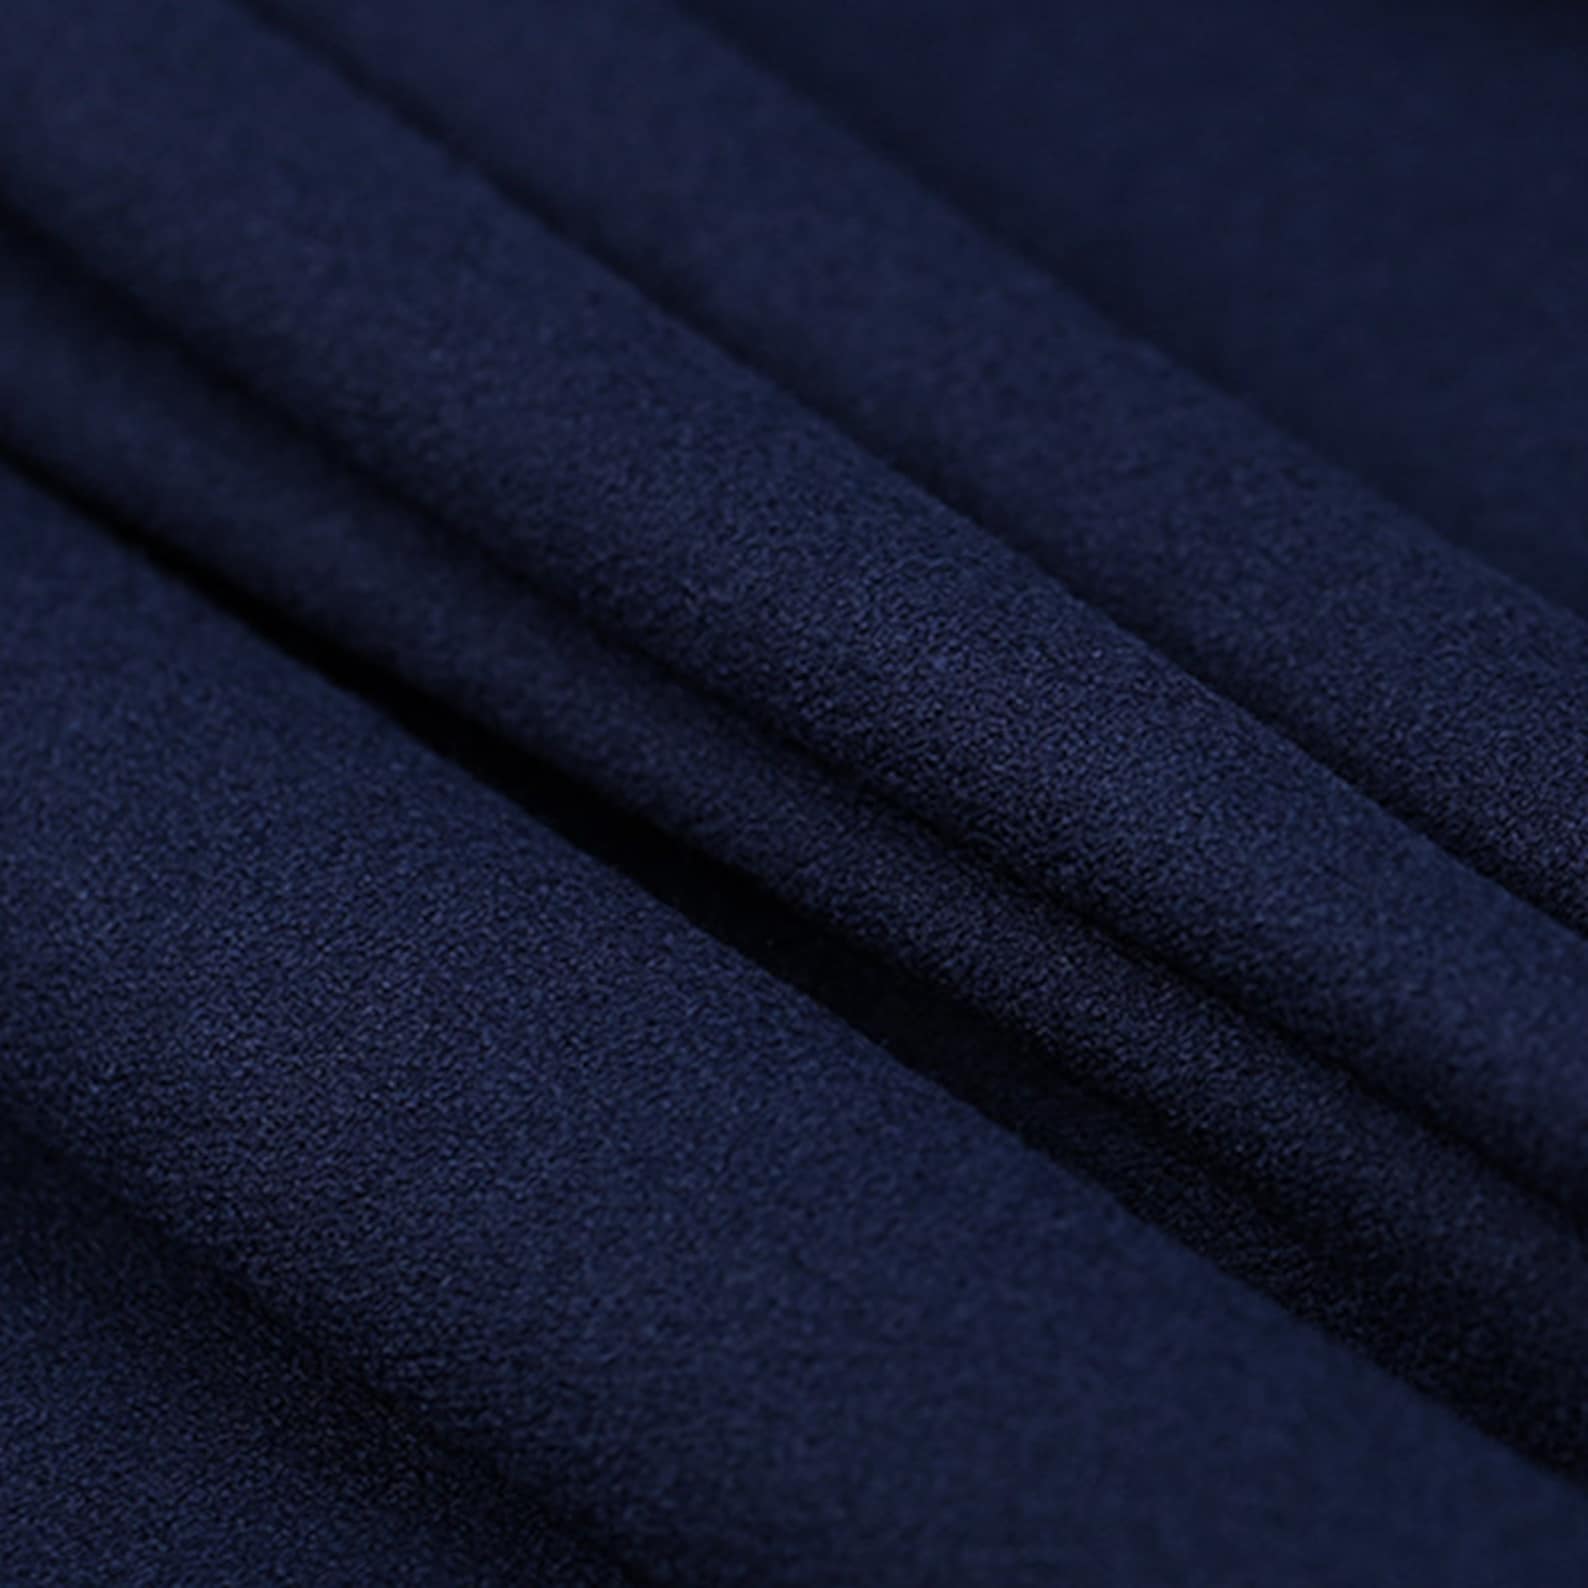 Navy blue Silk wool fabric Wool crepe solid color Fashion | Etsy